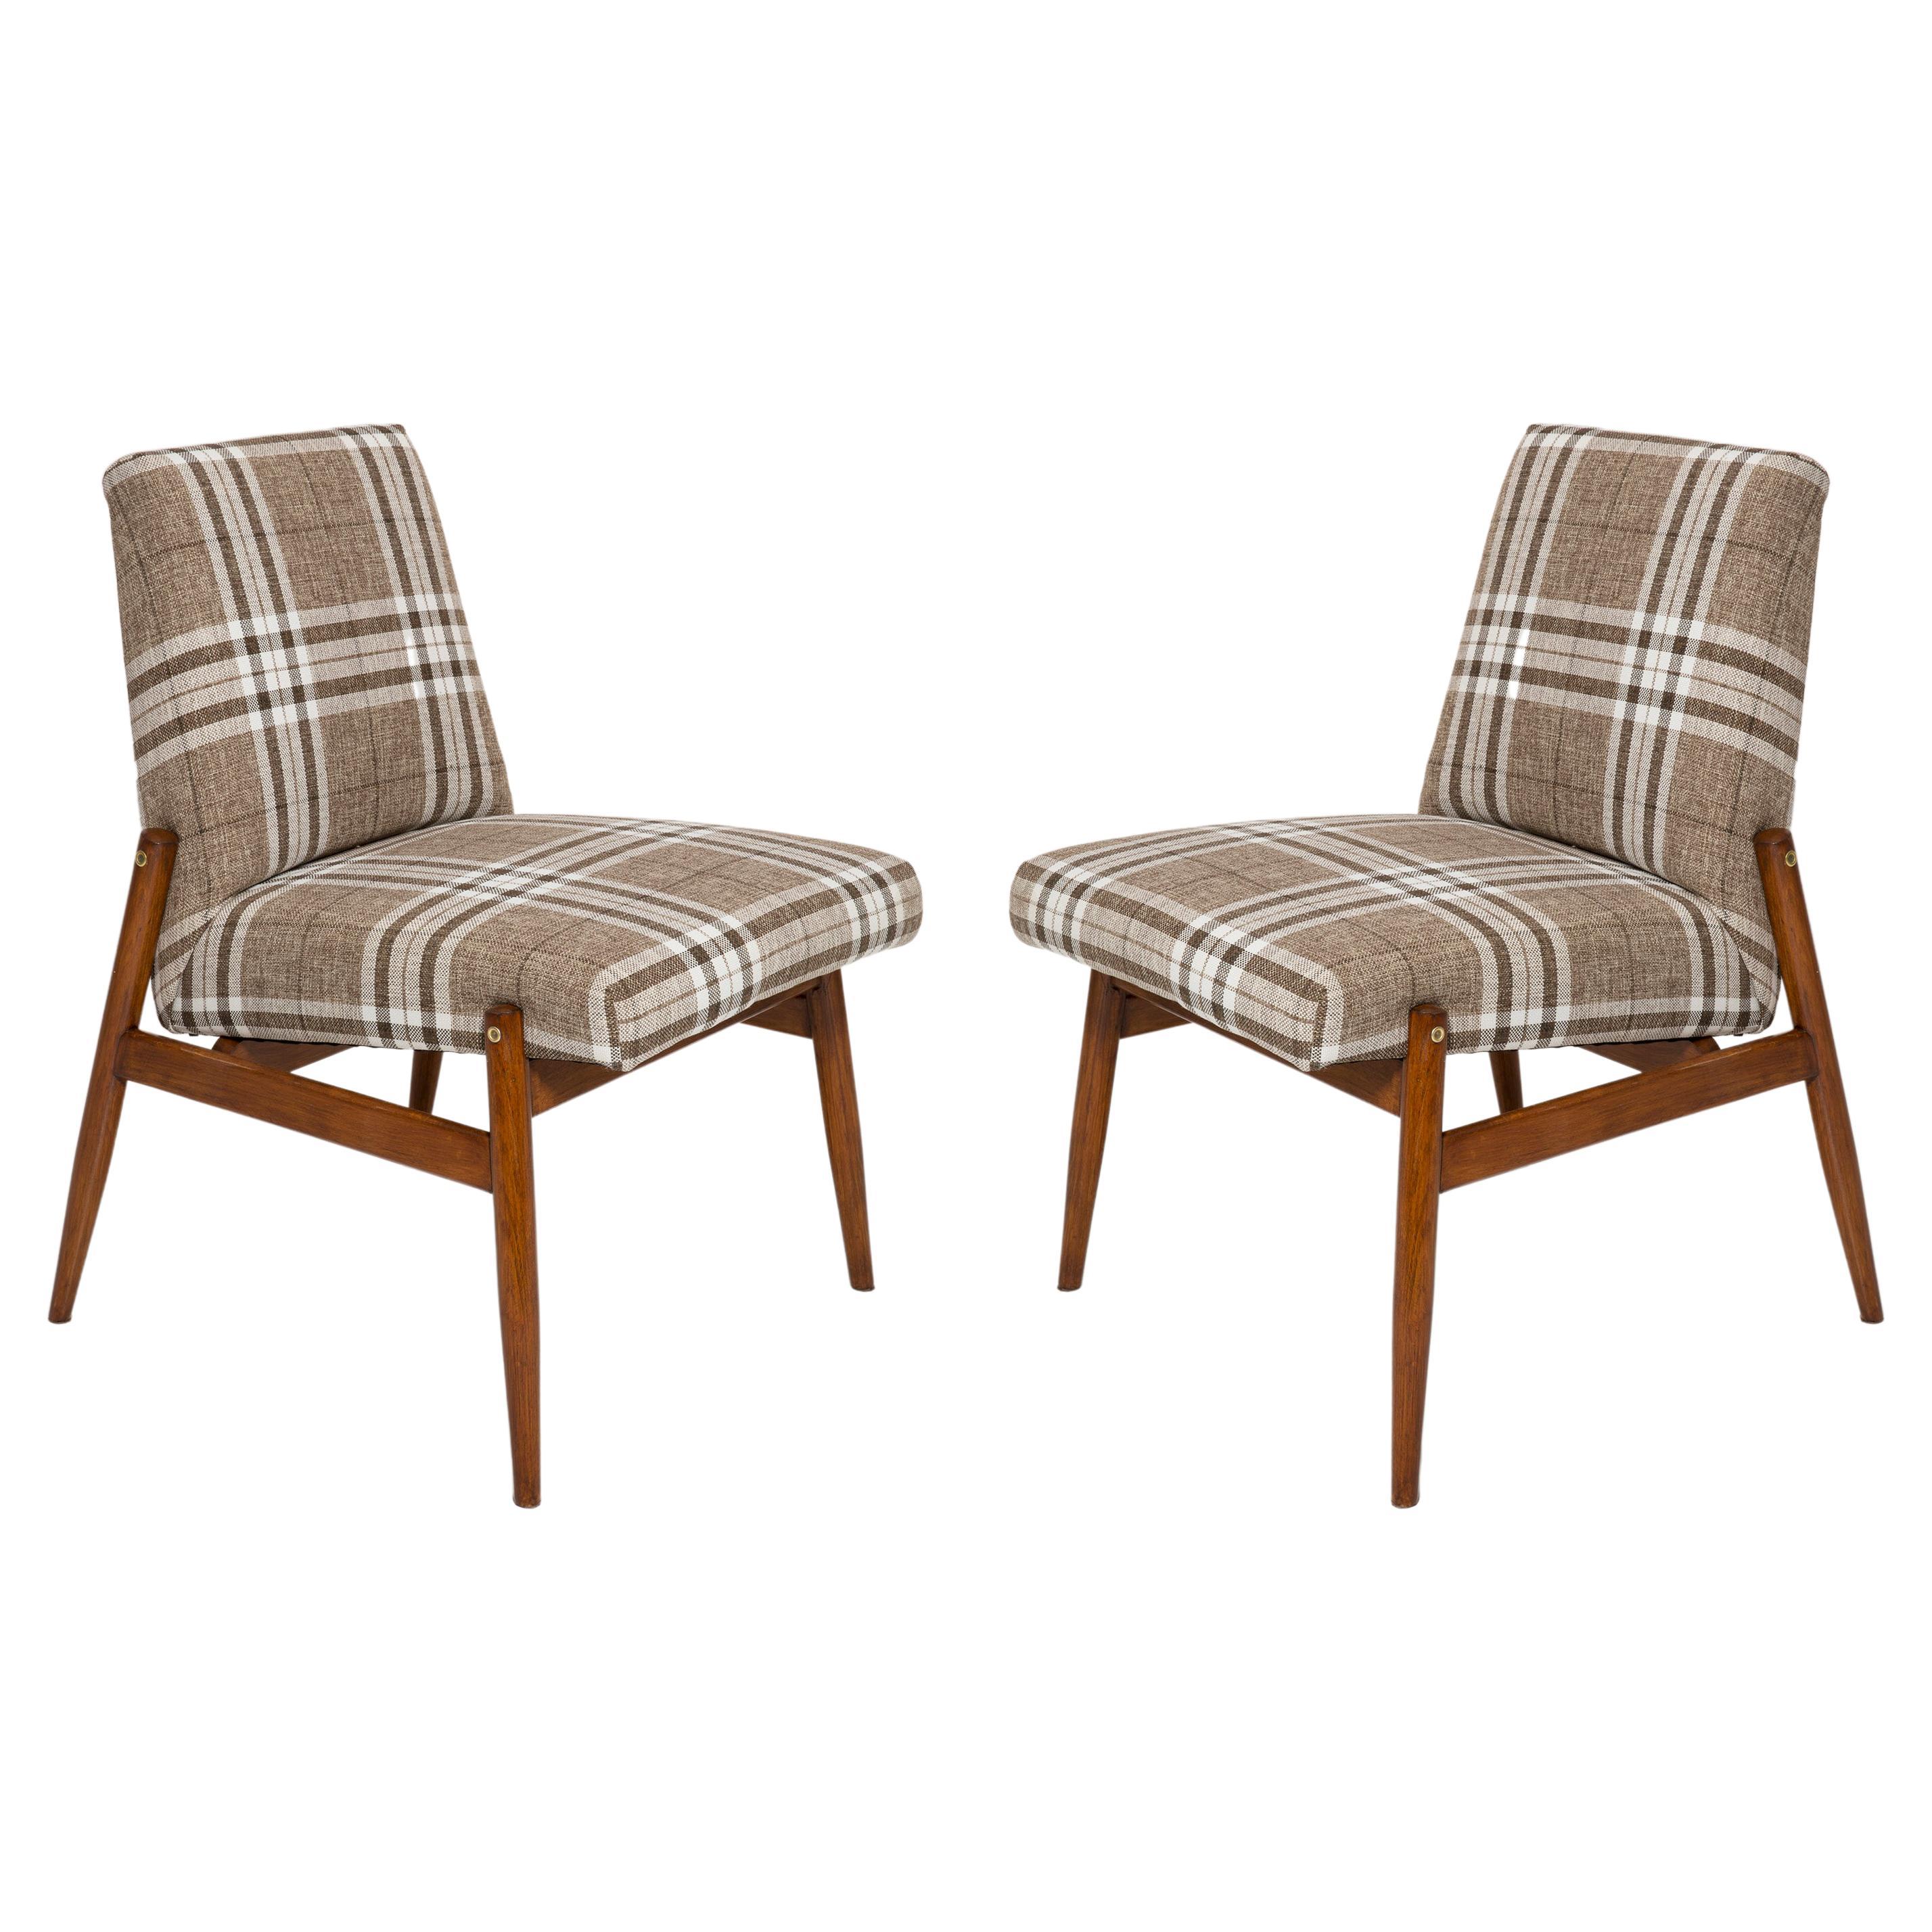 Pair of Midcentury Beige Checkered Fabric Armchairs, Europe, 1960s For Sale